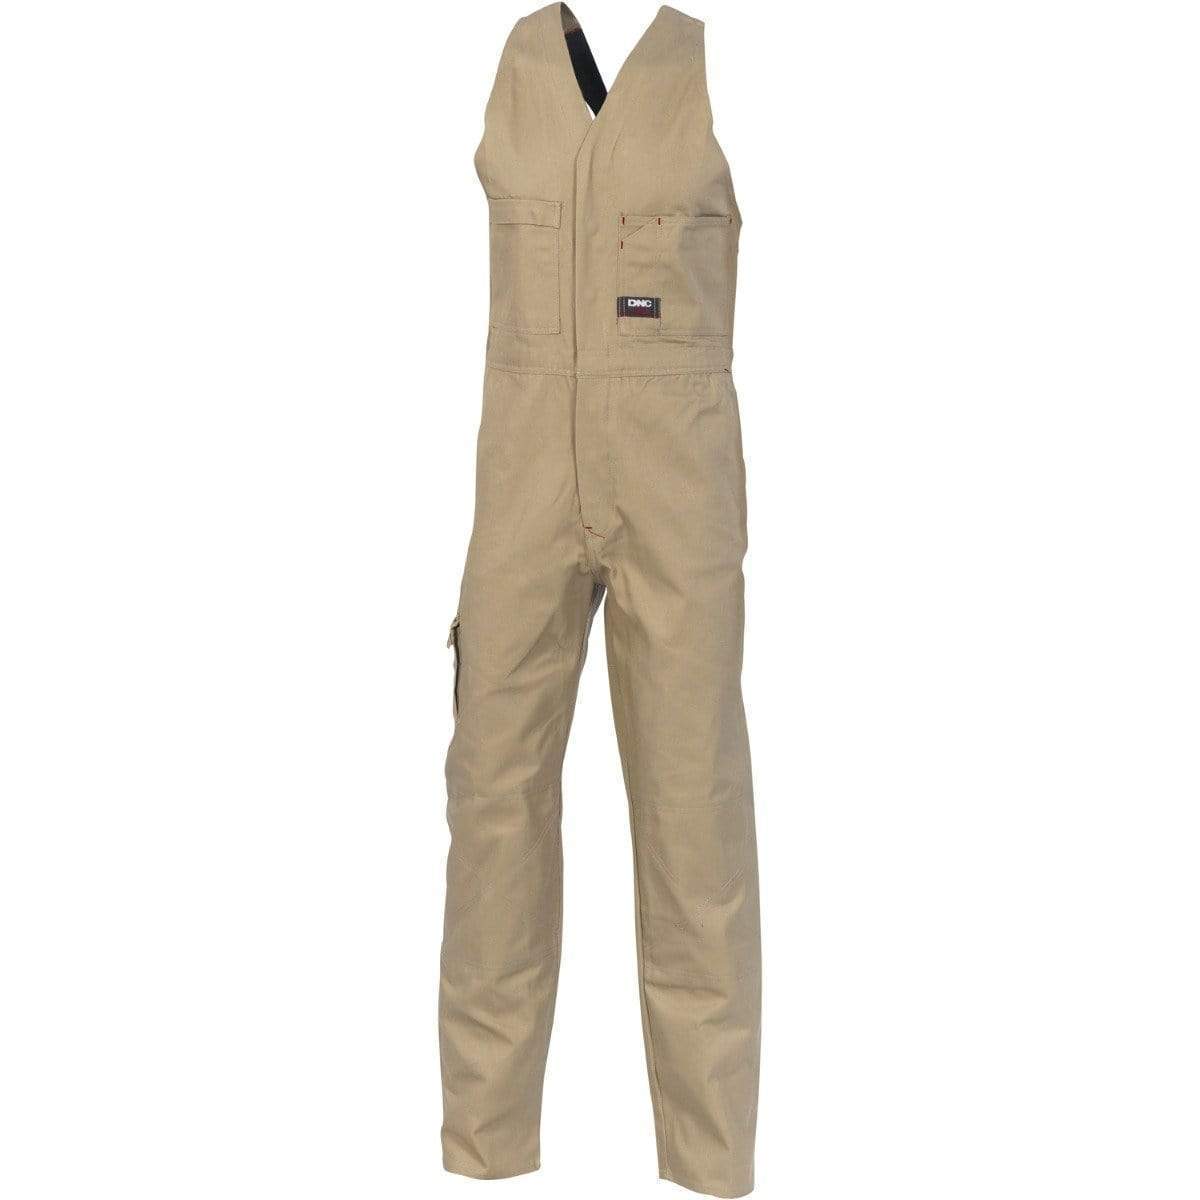 DNC Workwear Work Wear DNC WORKWEAR Cotton Drill Action Back Overall 3121